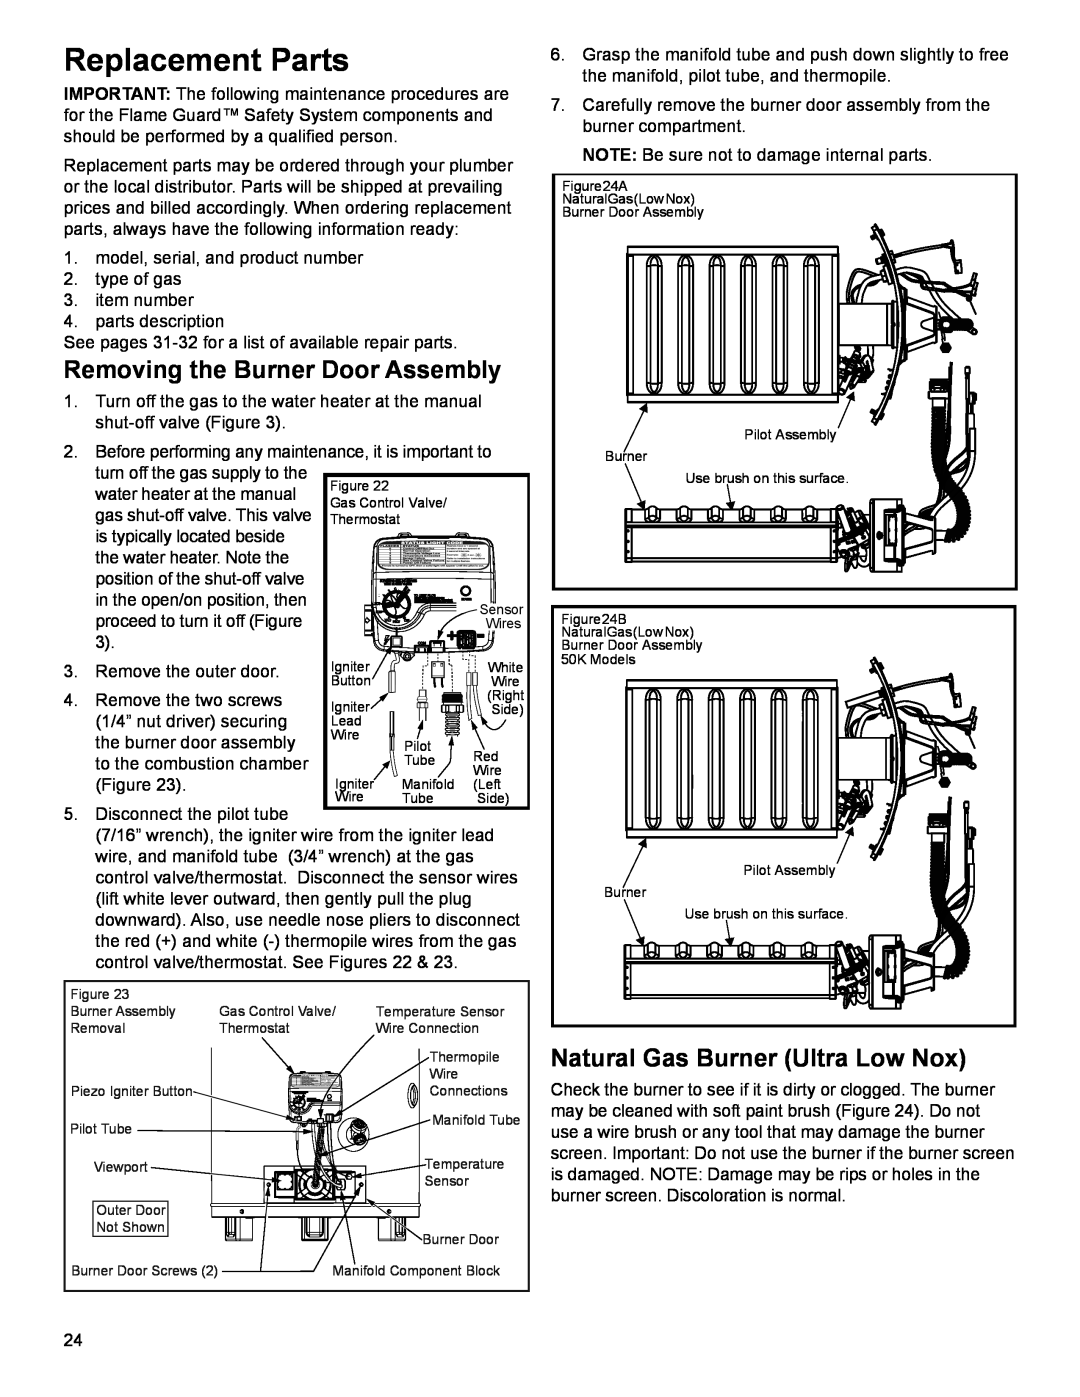 American Water Heater 318935-003 Replacement Parts, Removing the Burner Door Assembly, Natural Gas Burner Ultra Low Nox 